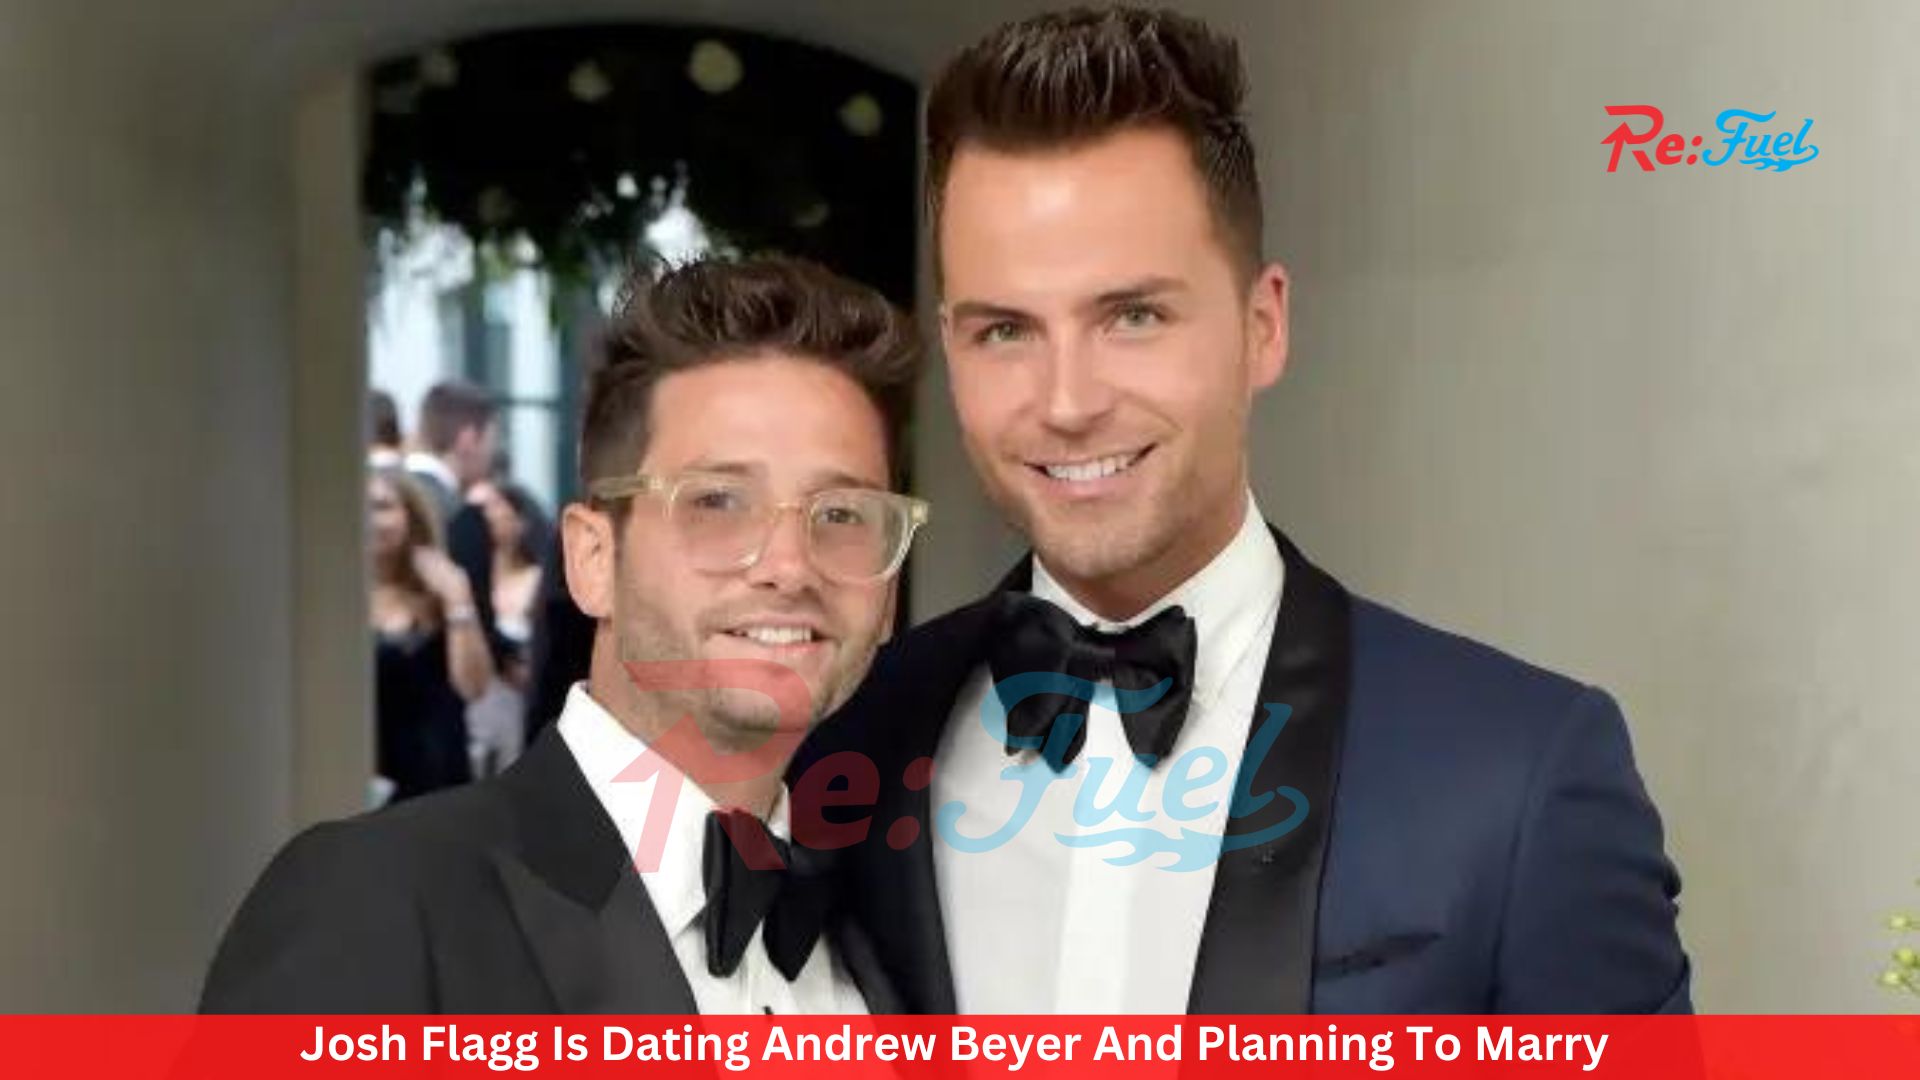 Josh Flagg Is Dating Andrew Beyer And Planning To Marry